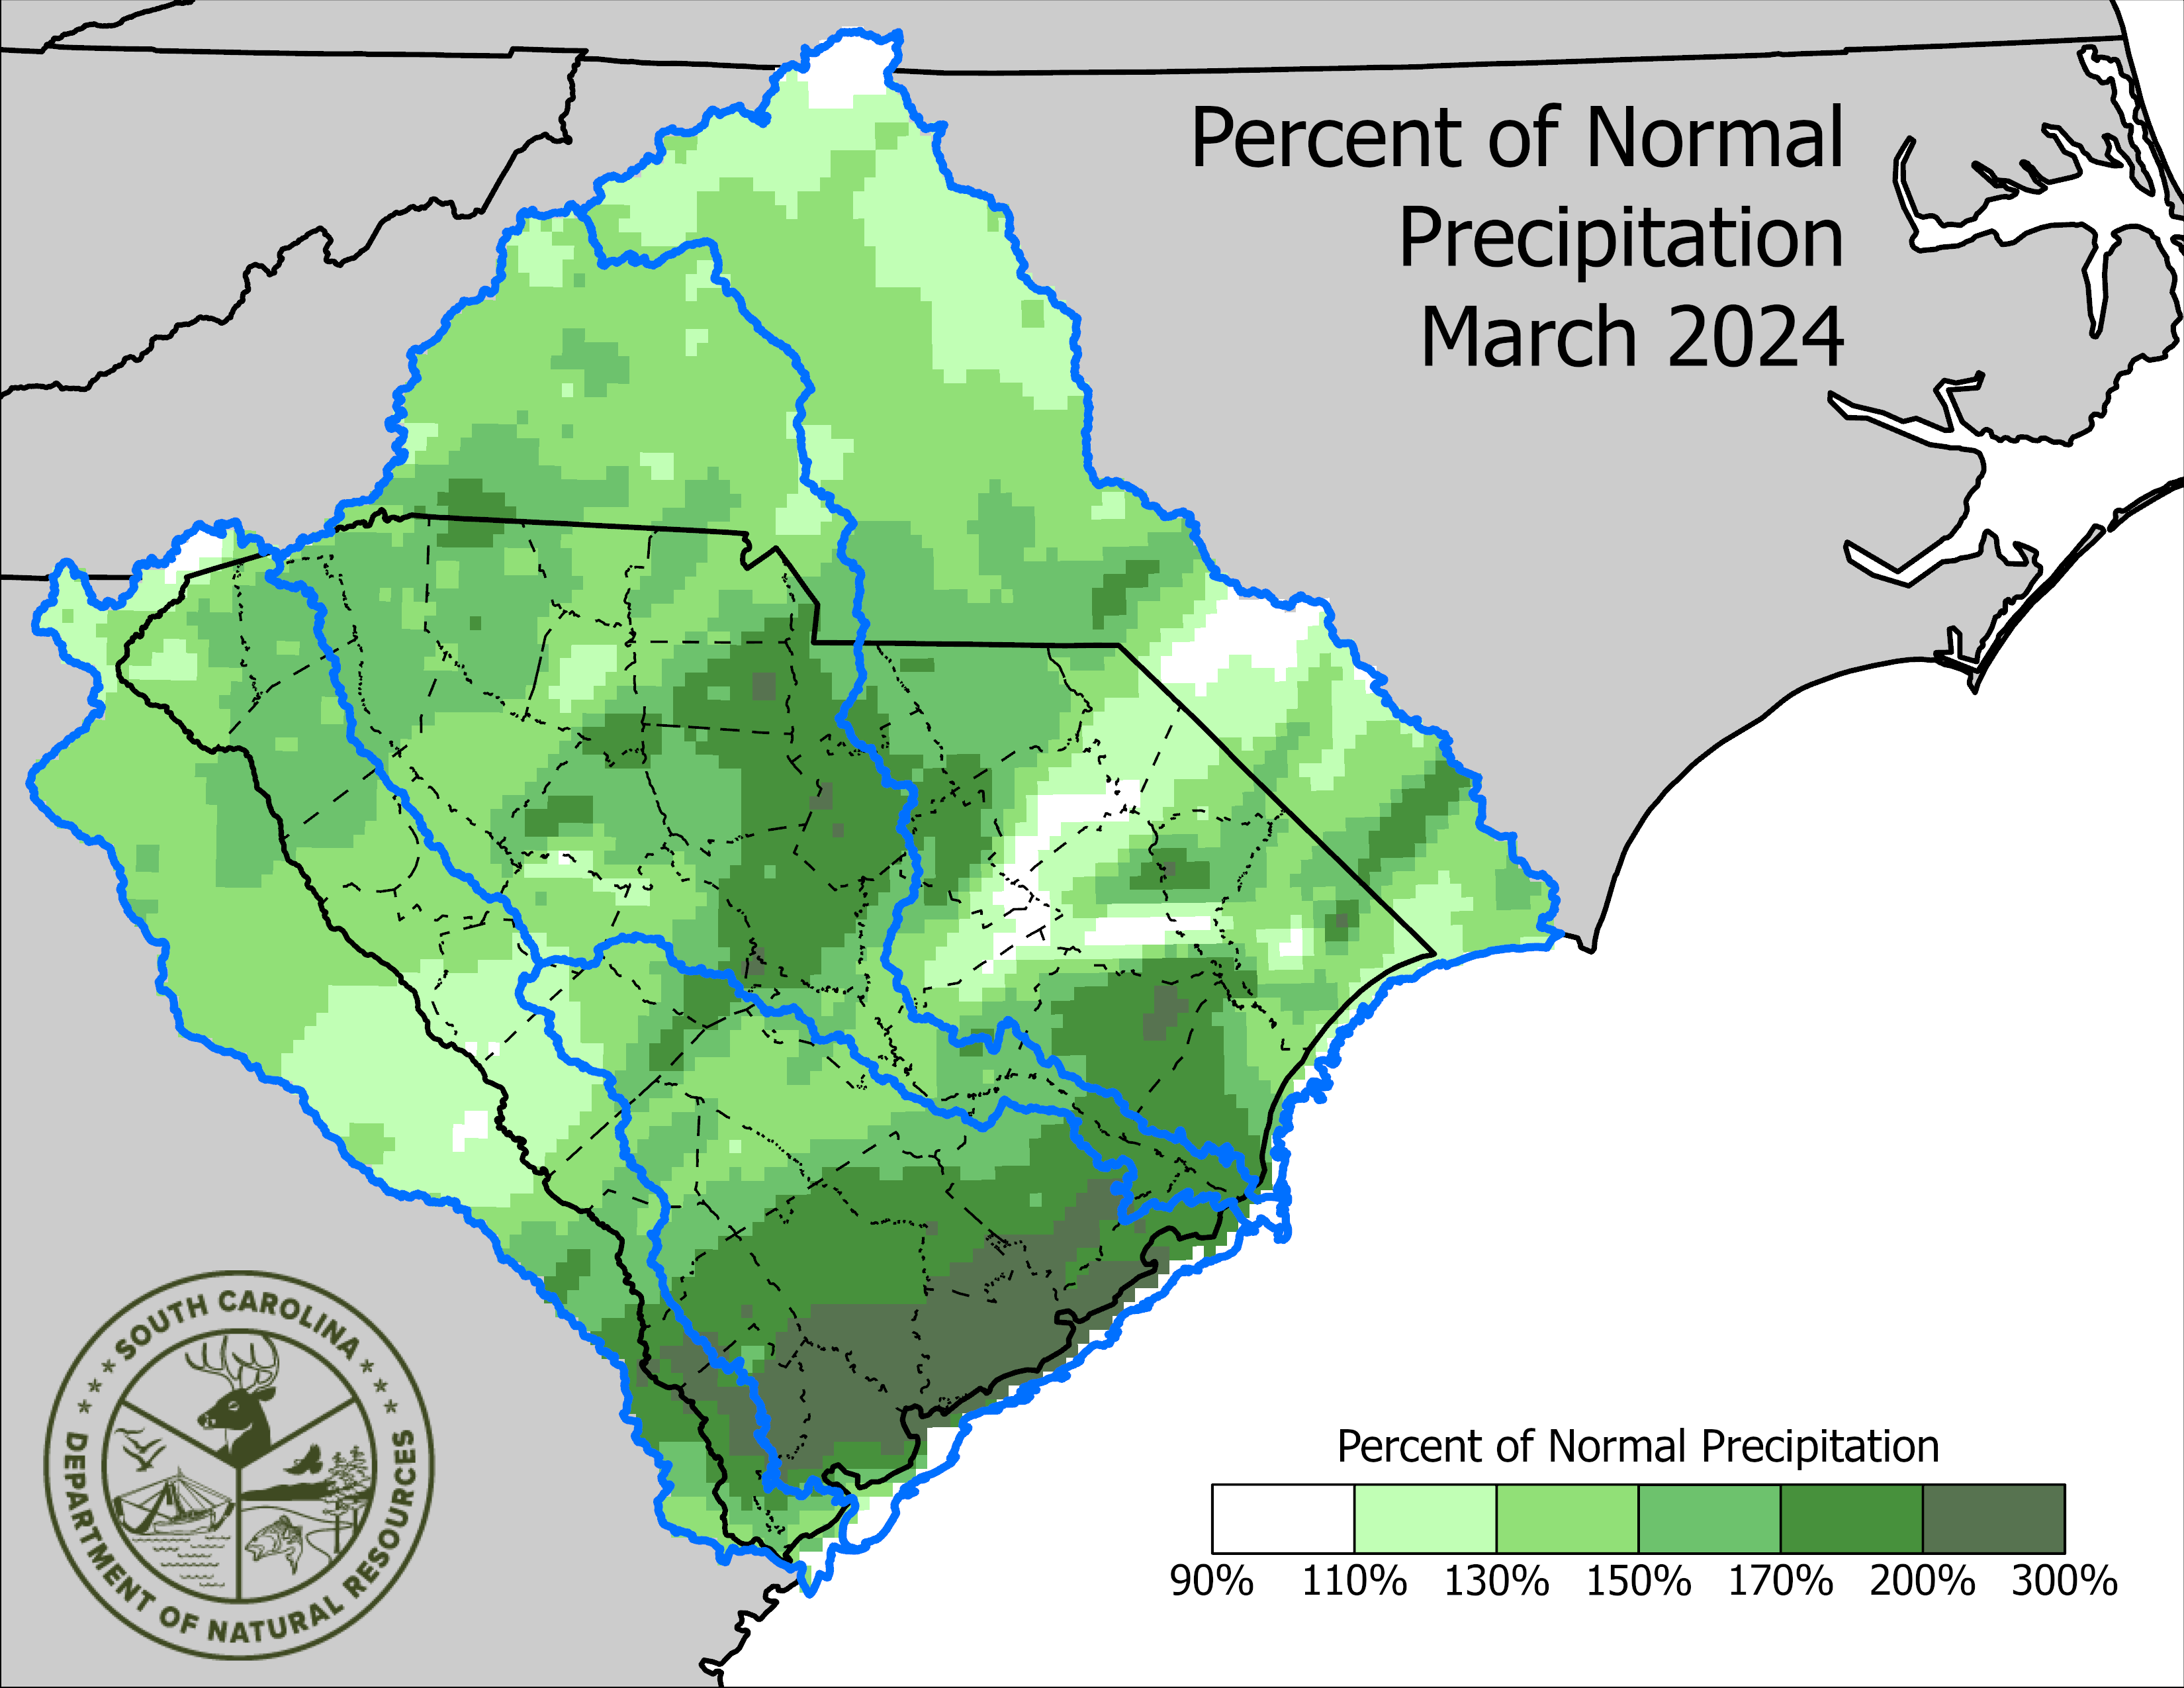 Thumbnail of percent of normal precipitation for the previous month.